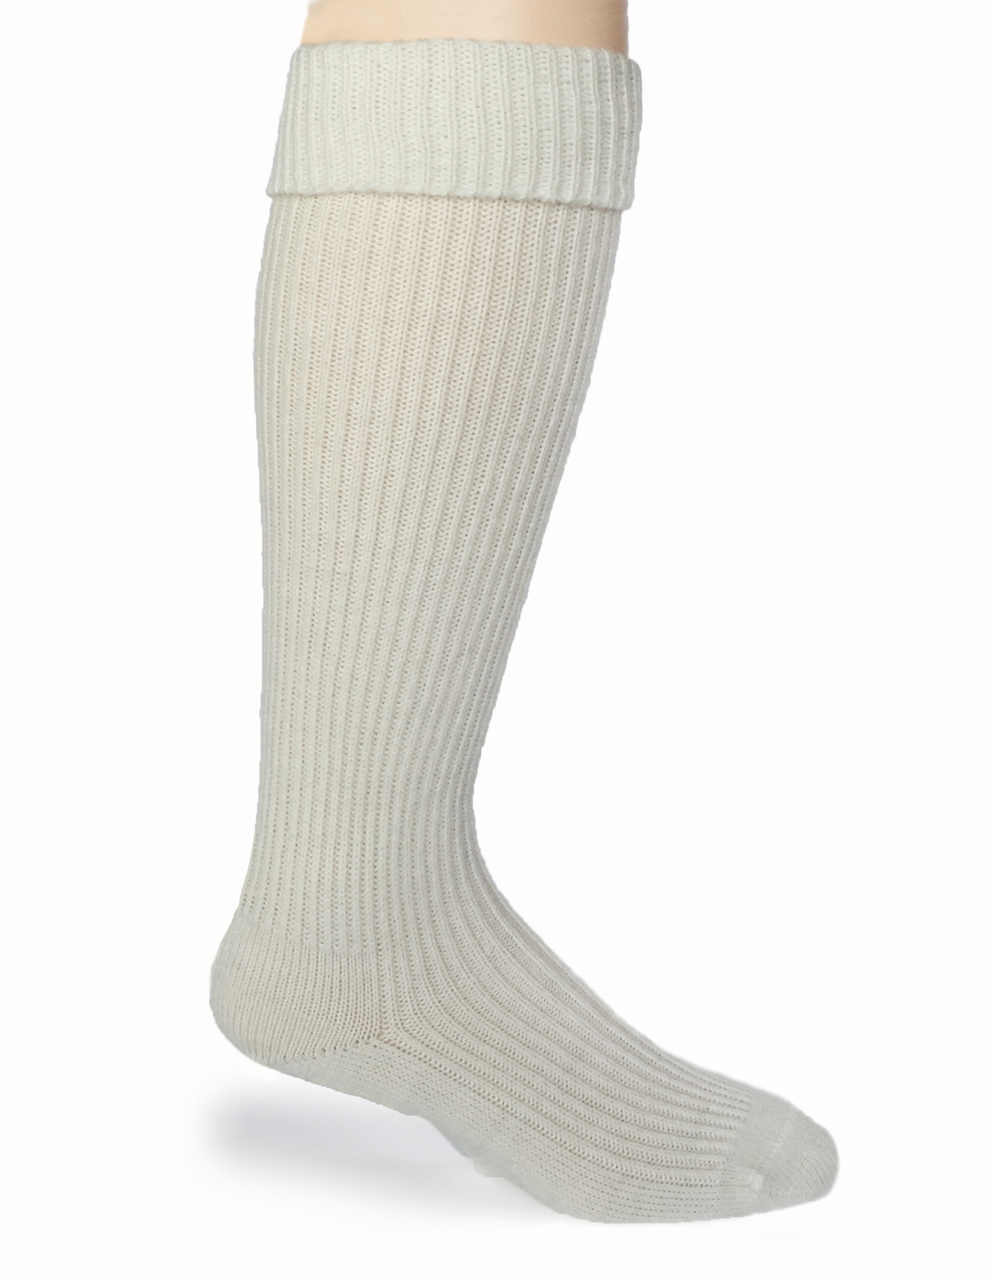 Old Fashioned Tender Tube Socks for Men and Women - Baby Alpaca | Sun ...